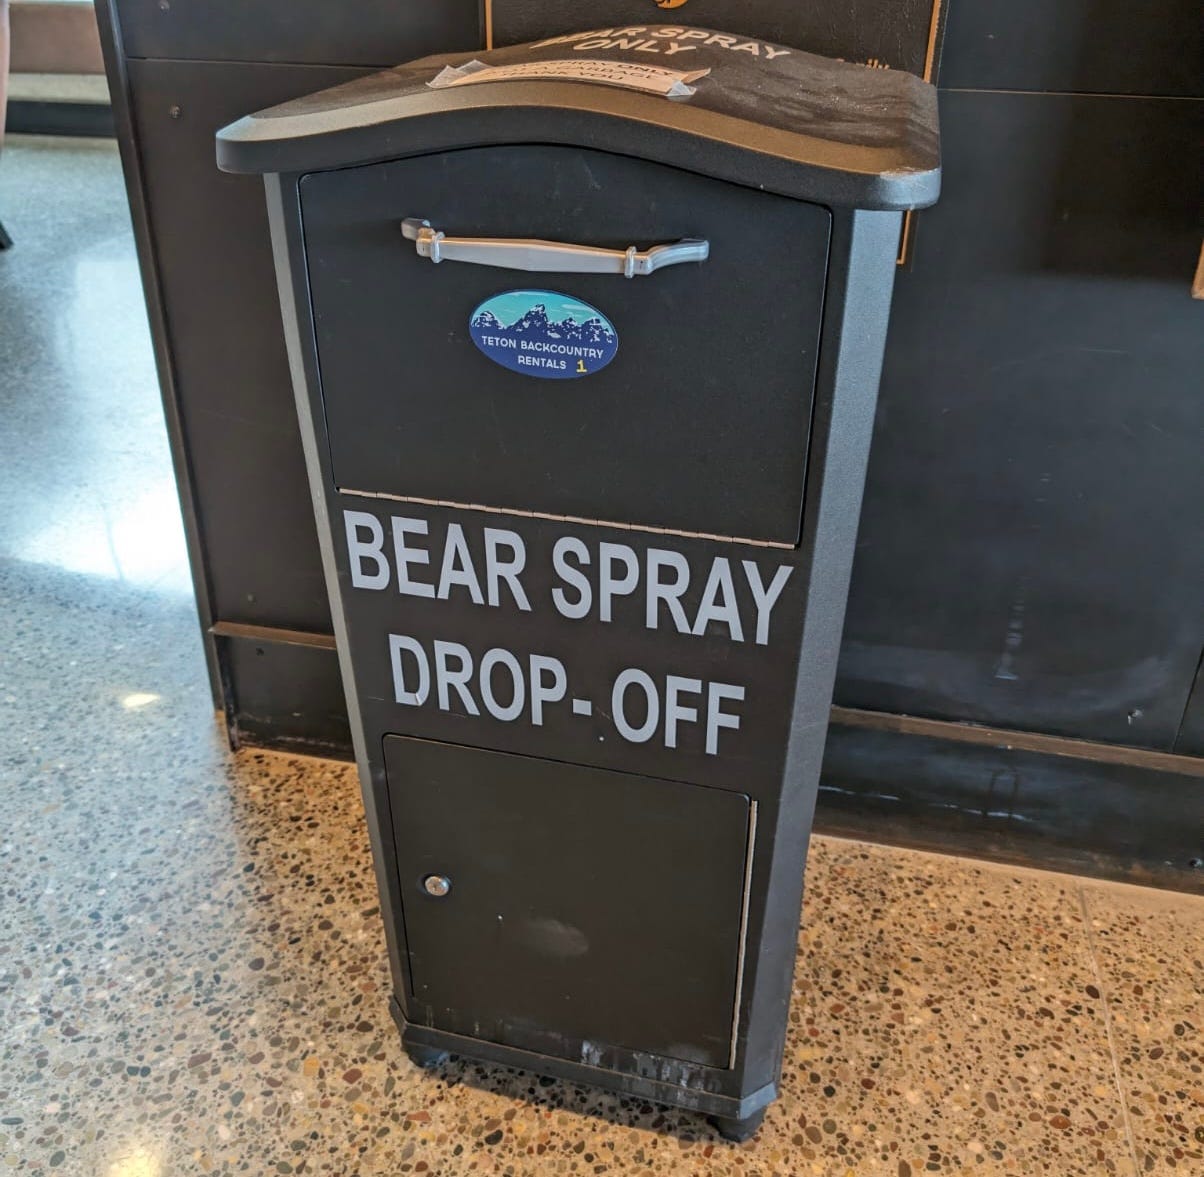 A box labeled "BEAR SPRAY DROP-OFF" with black casing, a silver handle, and a blue logo for Teton Backcountry Rentals